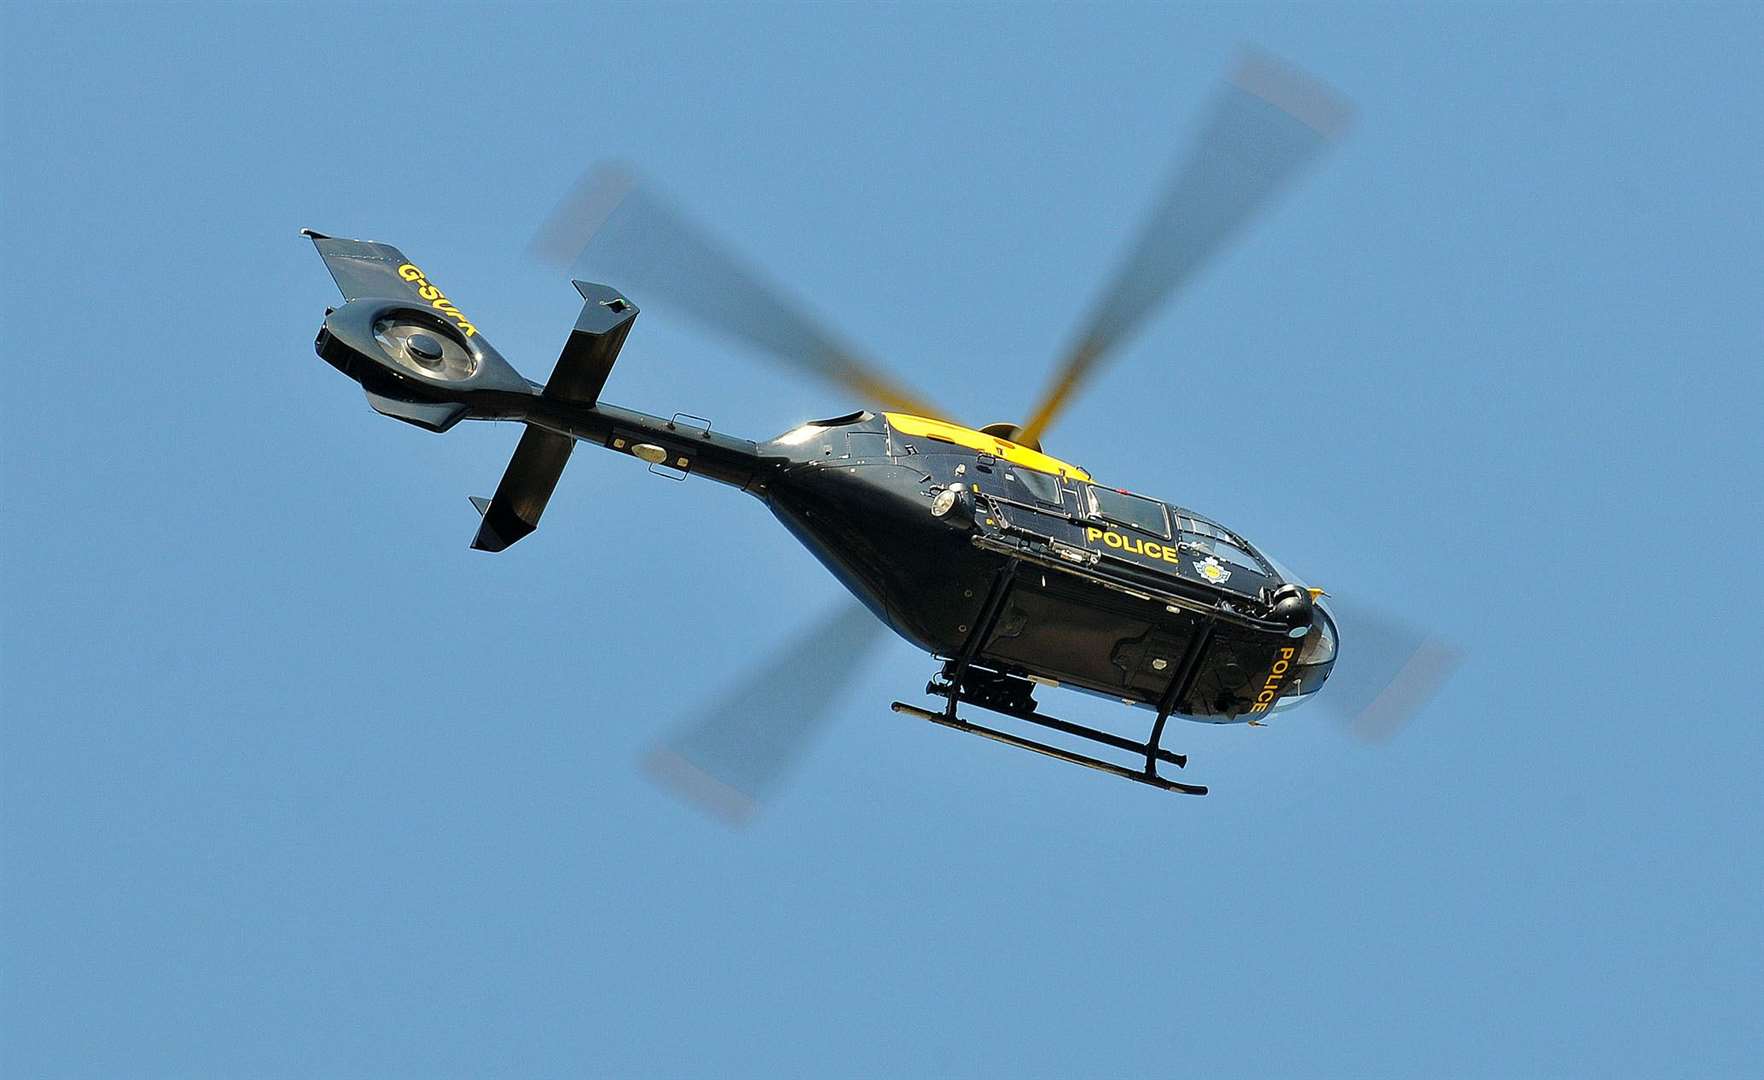 Police Helicopter. (13975193)